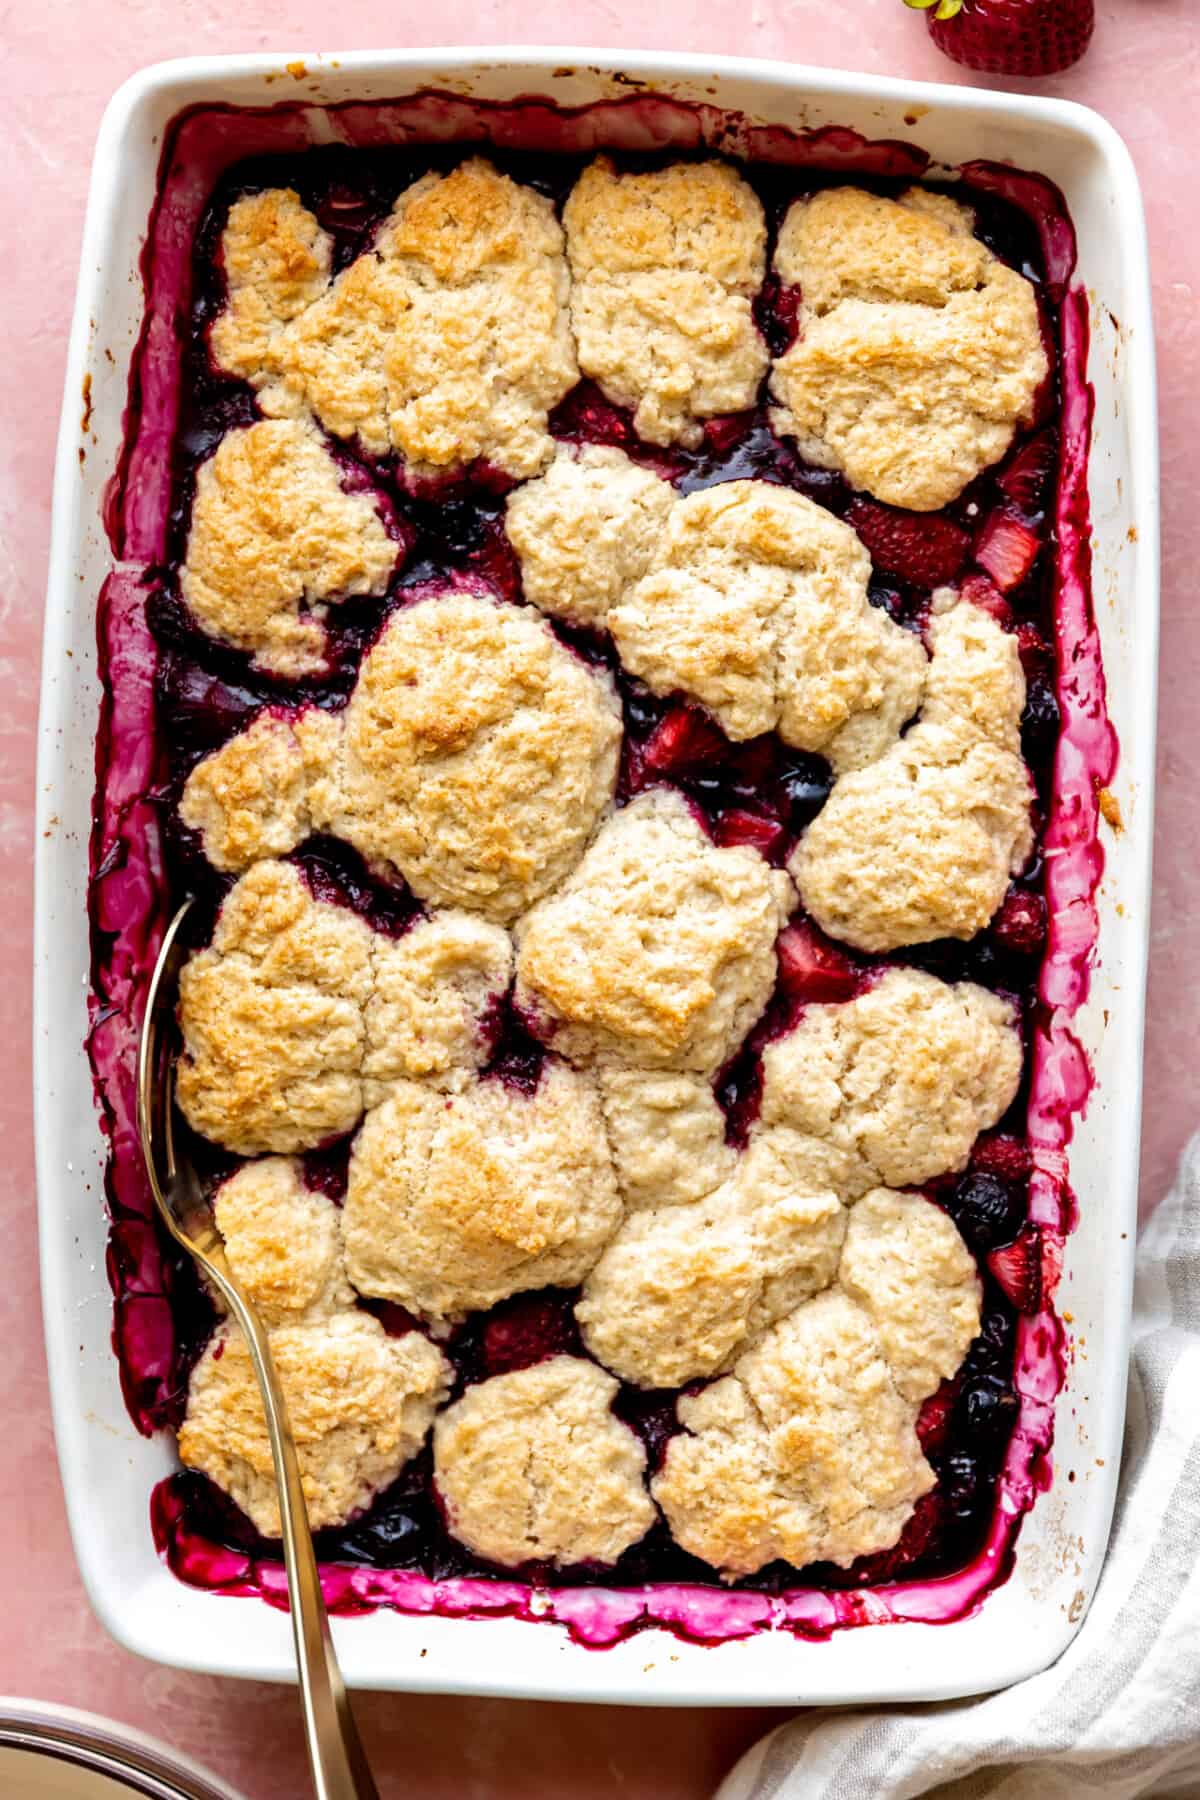 Baked mixed berry cobbler with a biscuit like topping.